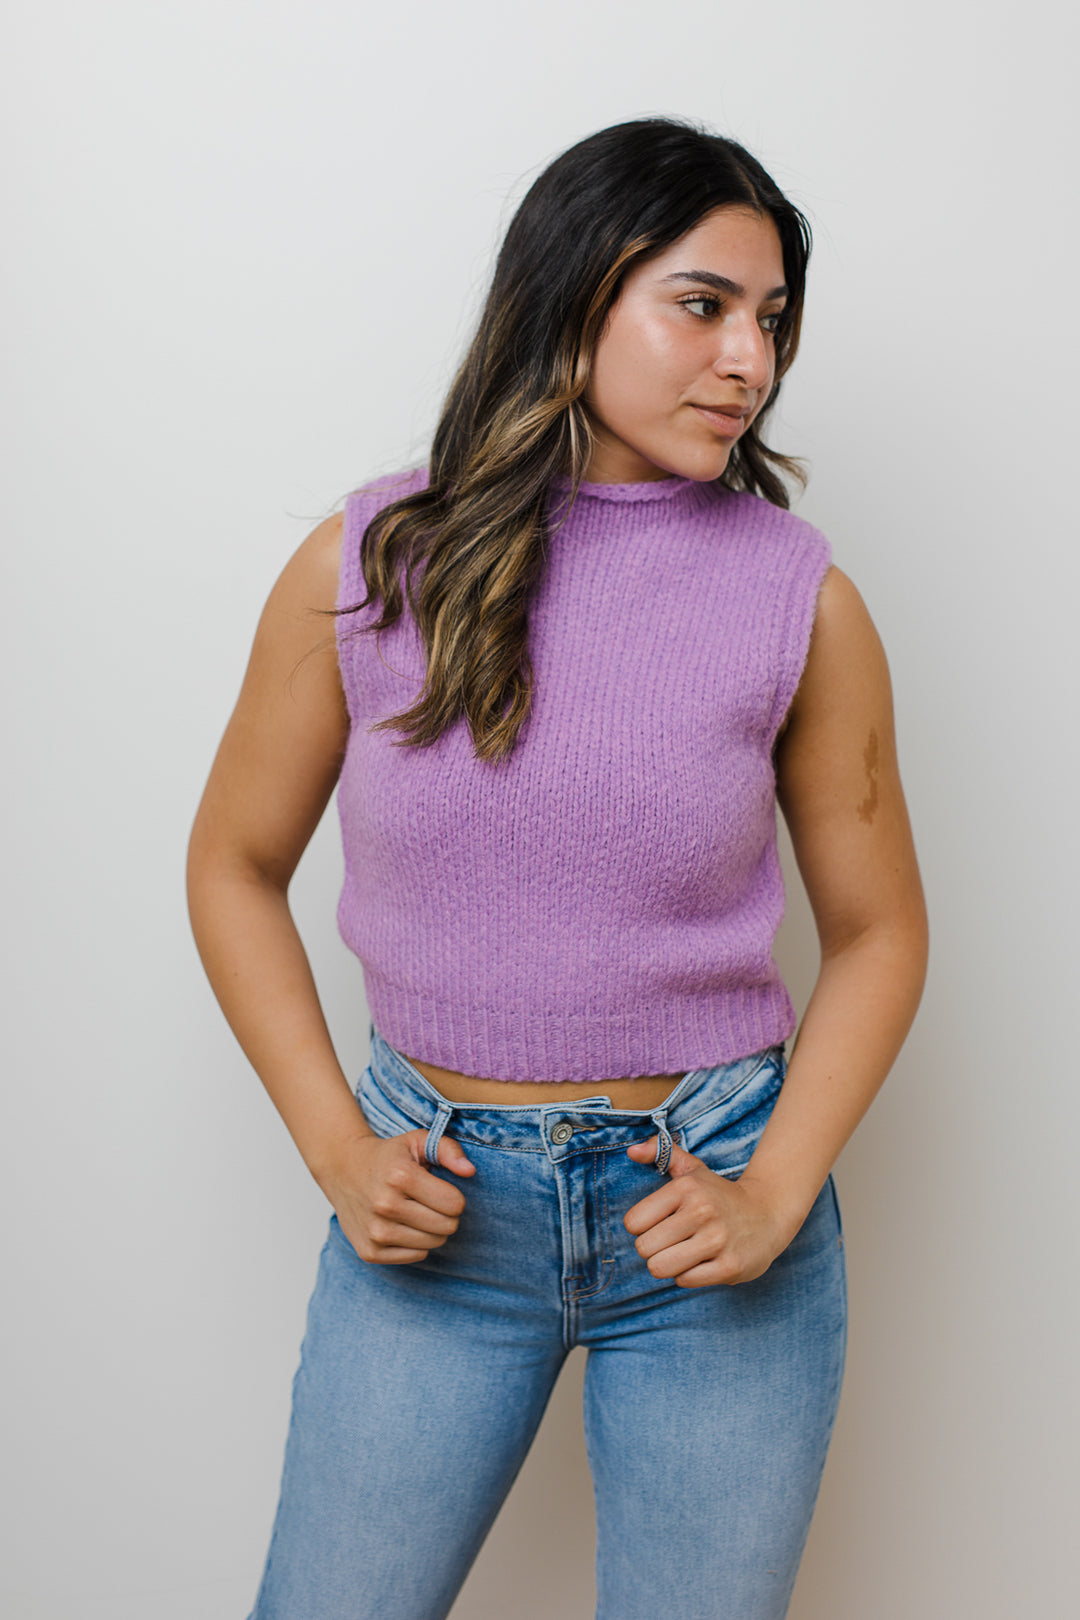 The Head Of The Class Cropped Sweater Vest